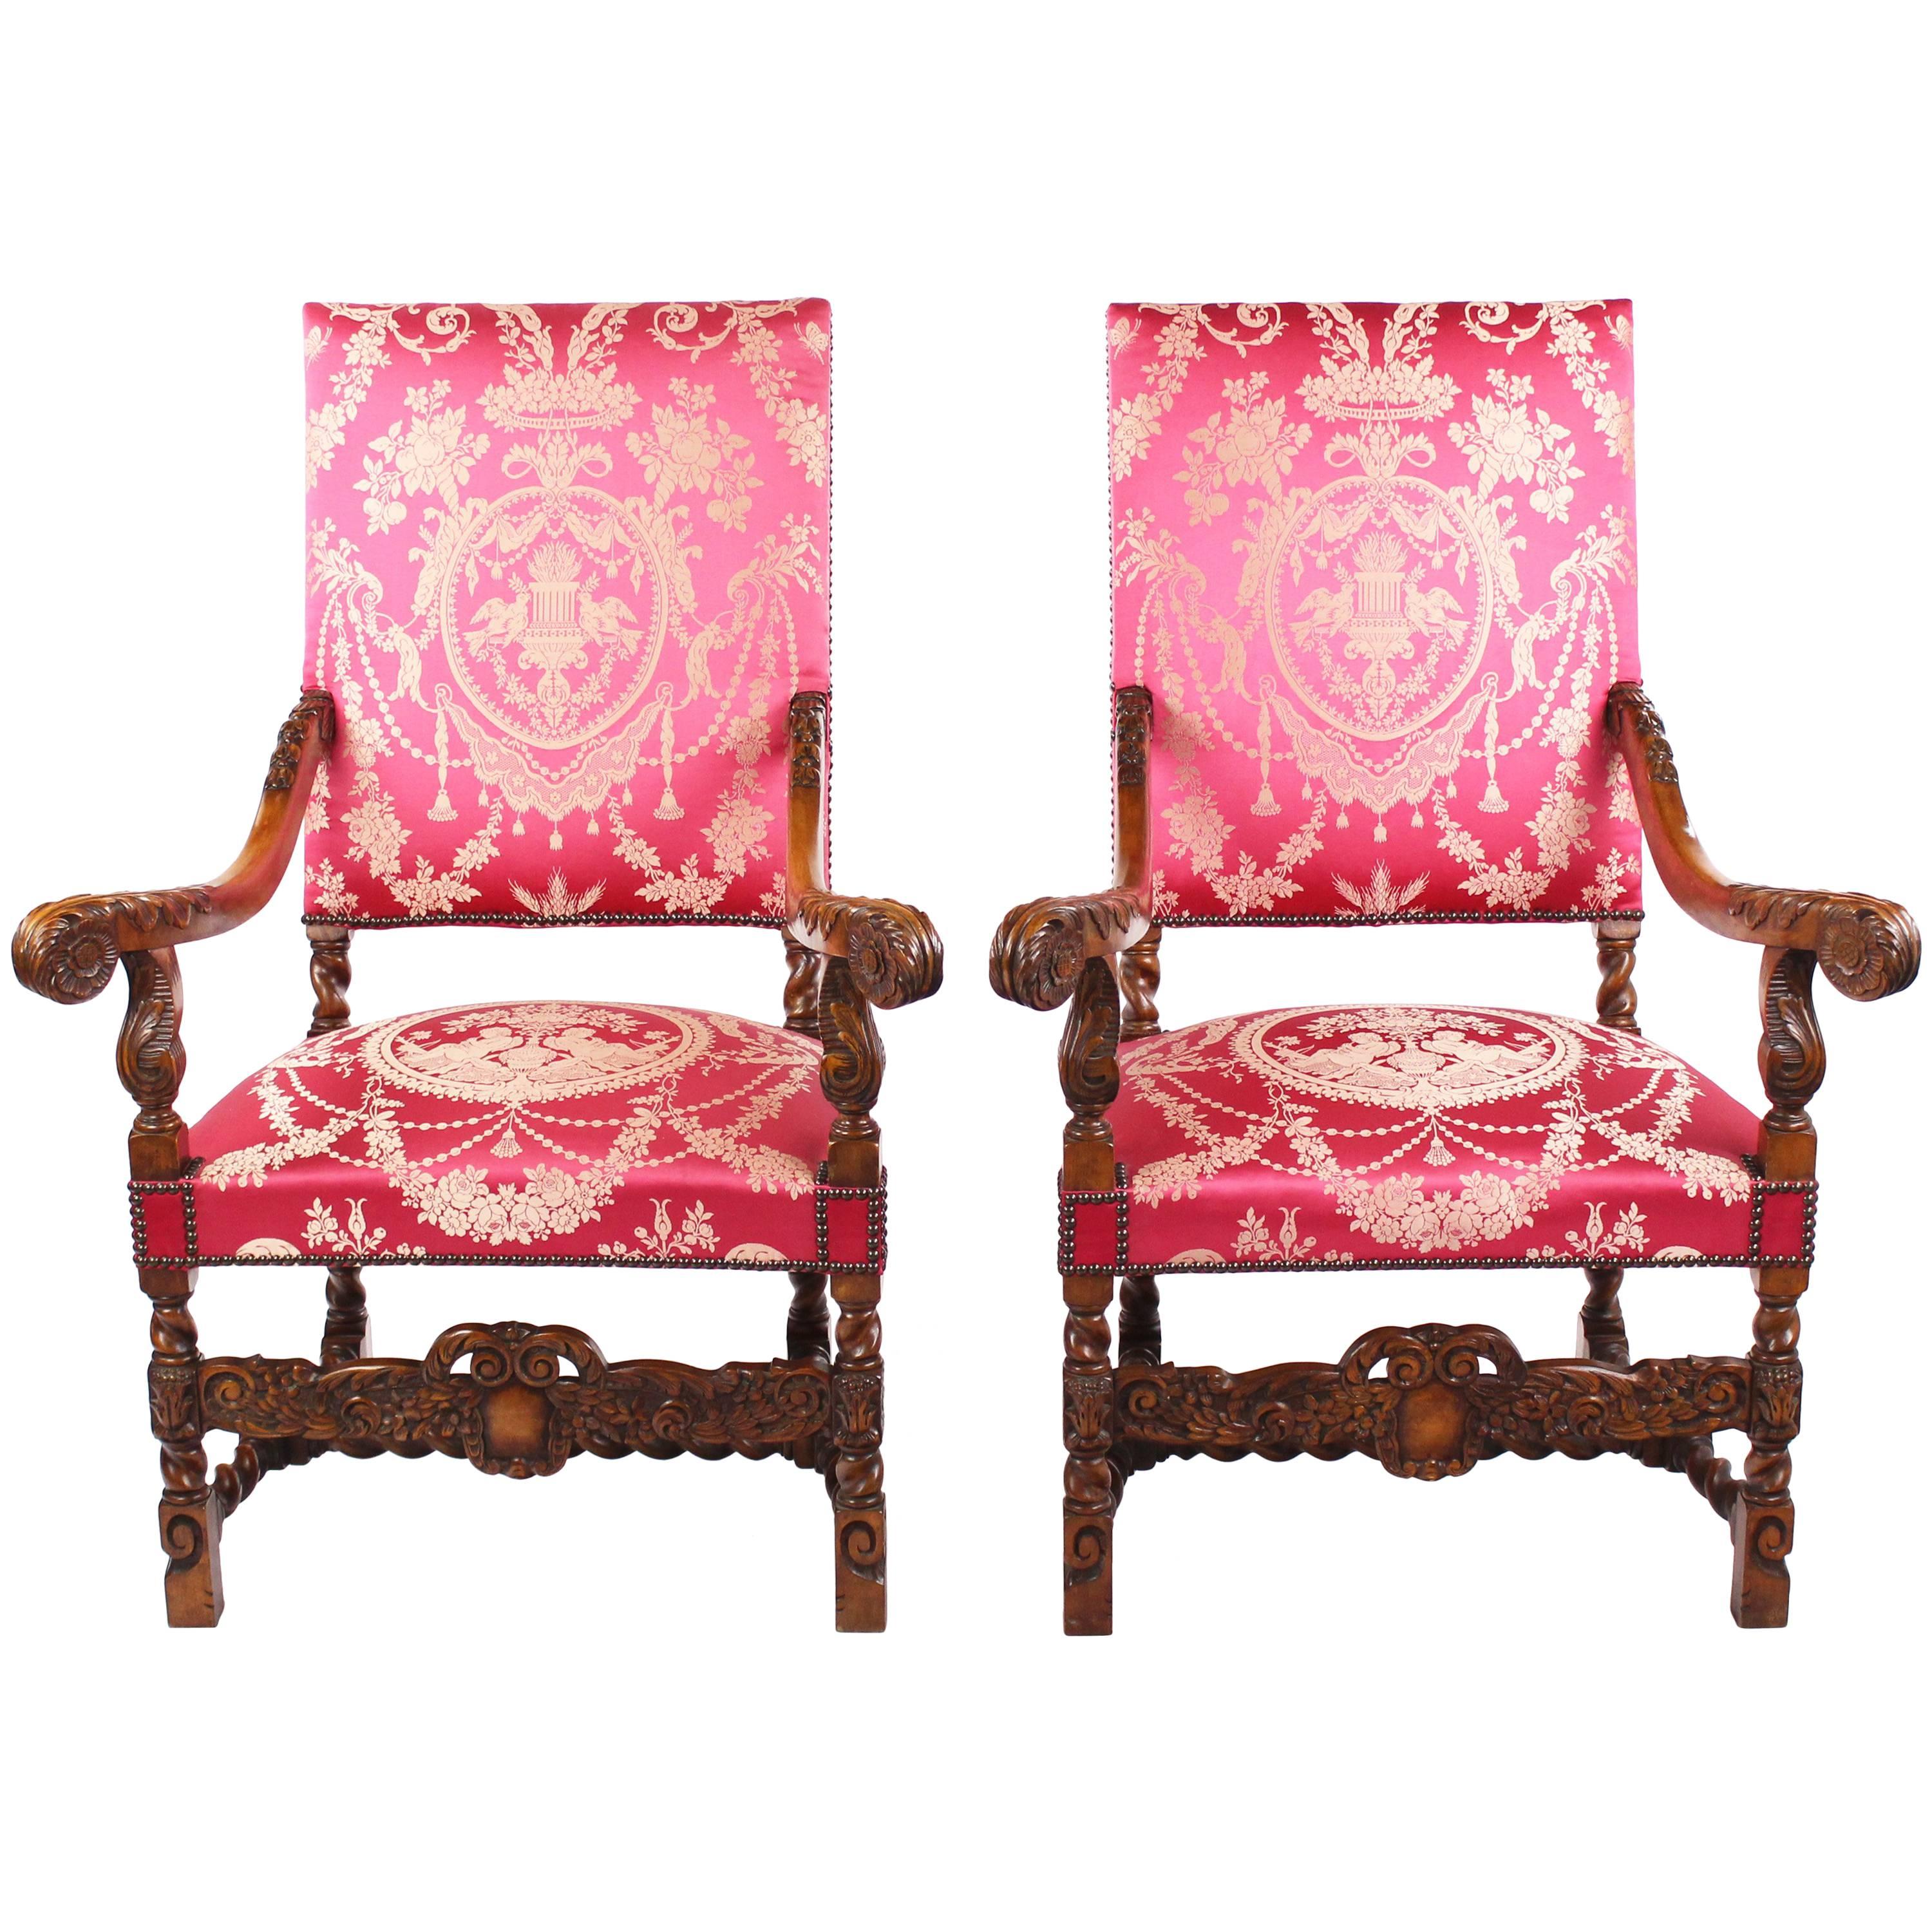 Pair of Chairs, Beech Massively, circa 1880-1890, Carved and Stilted